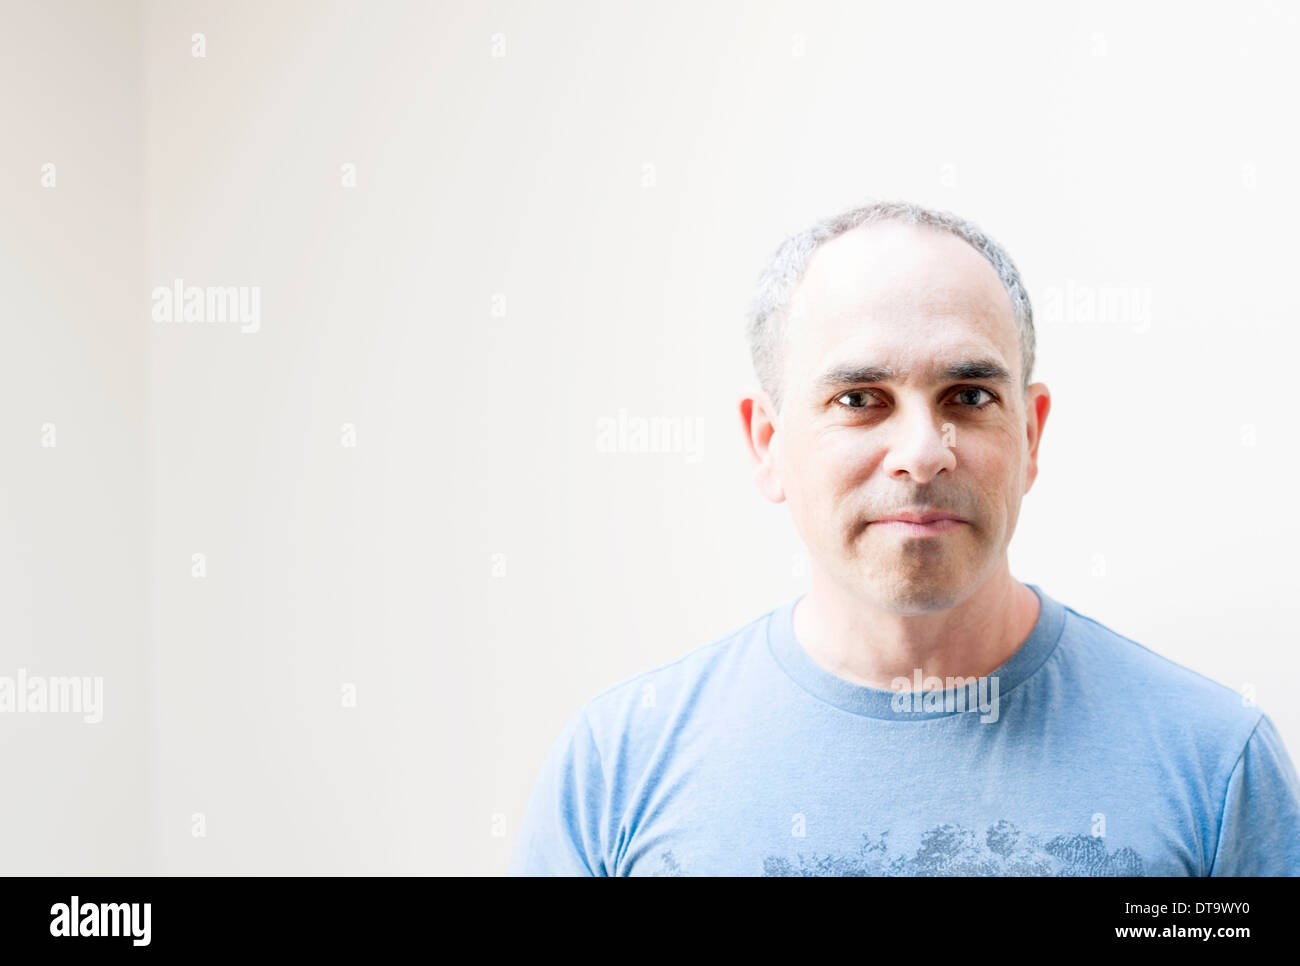 Middle aged baby boomer man on white background with copy space Stock Photo